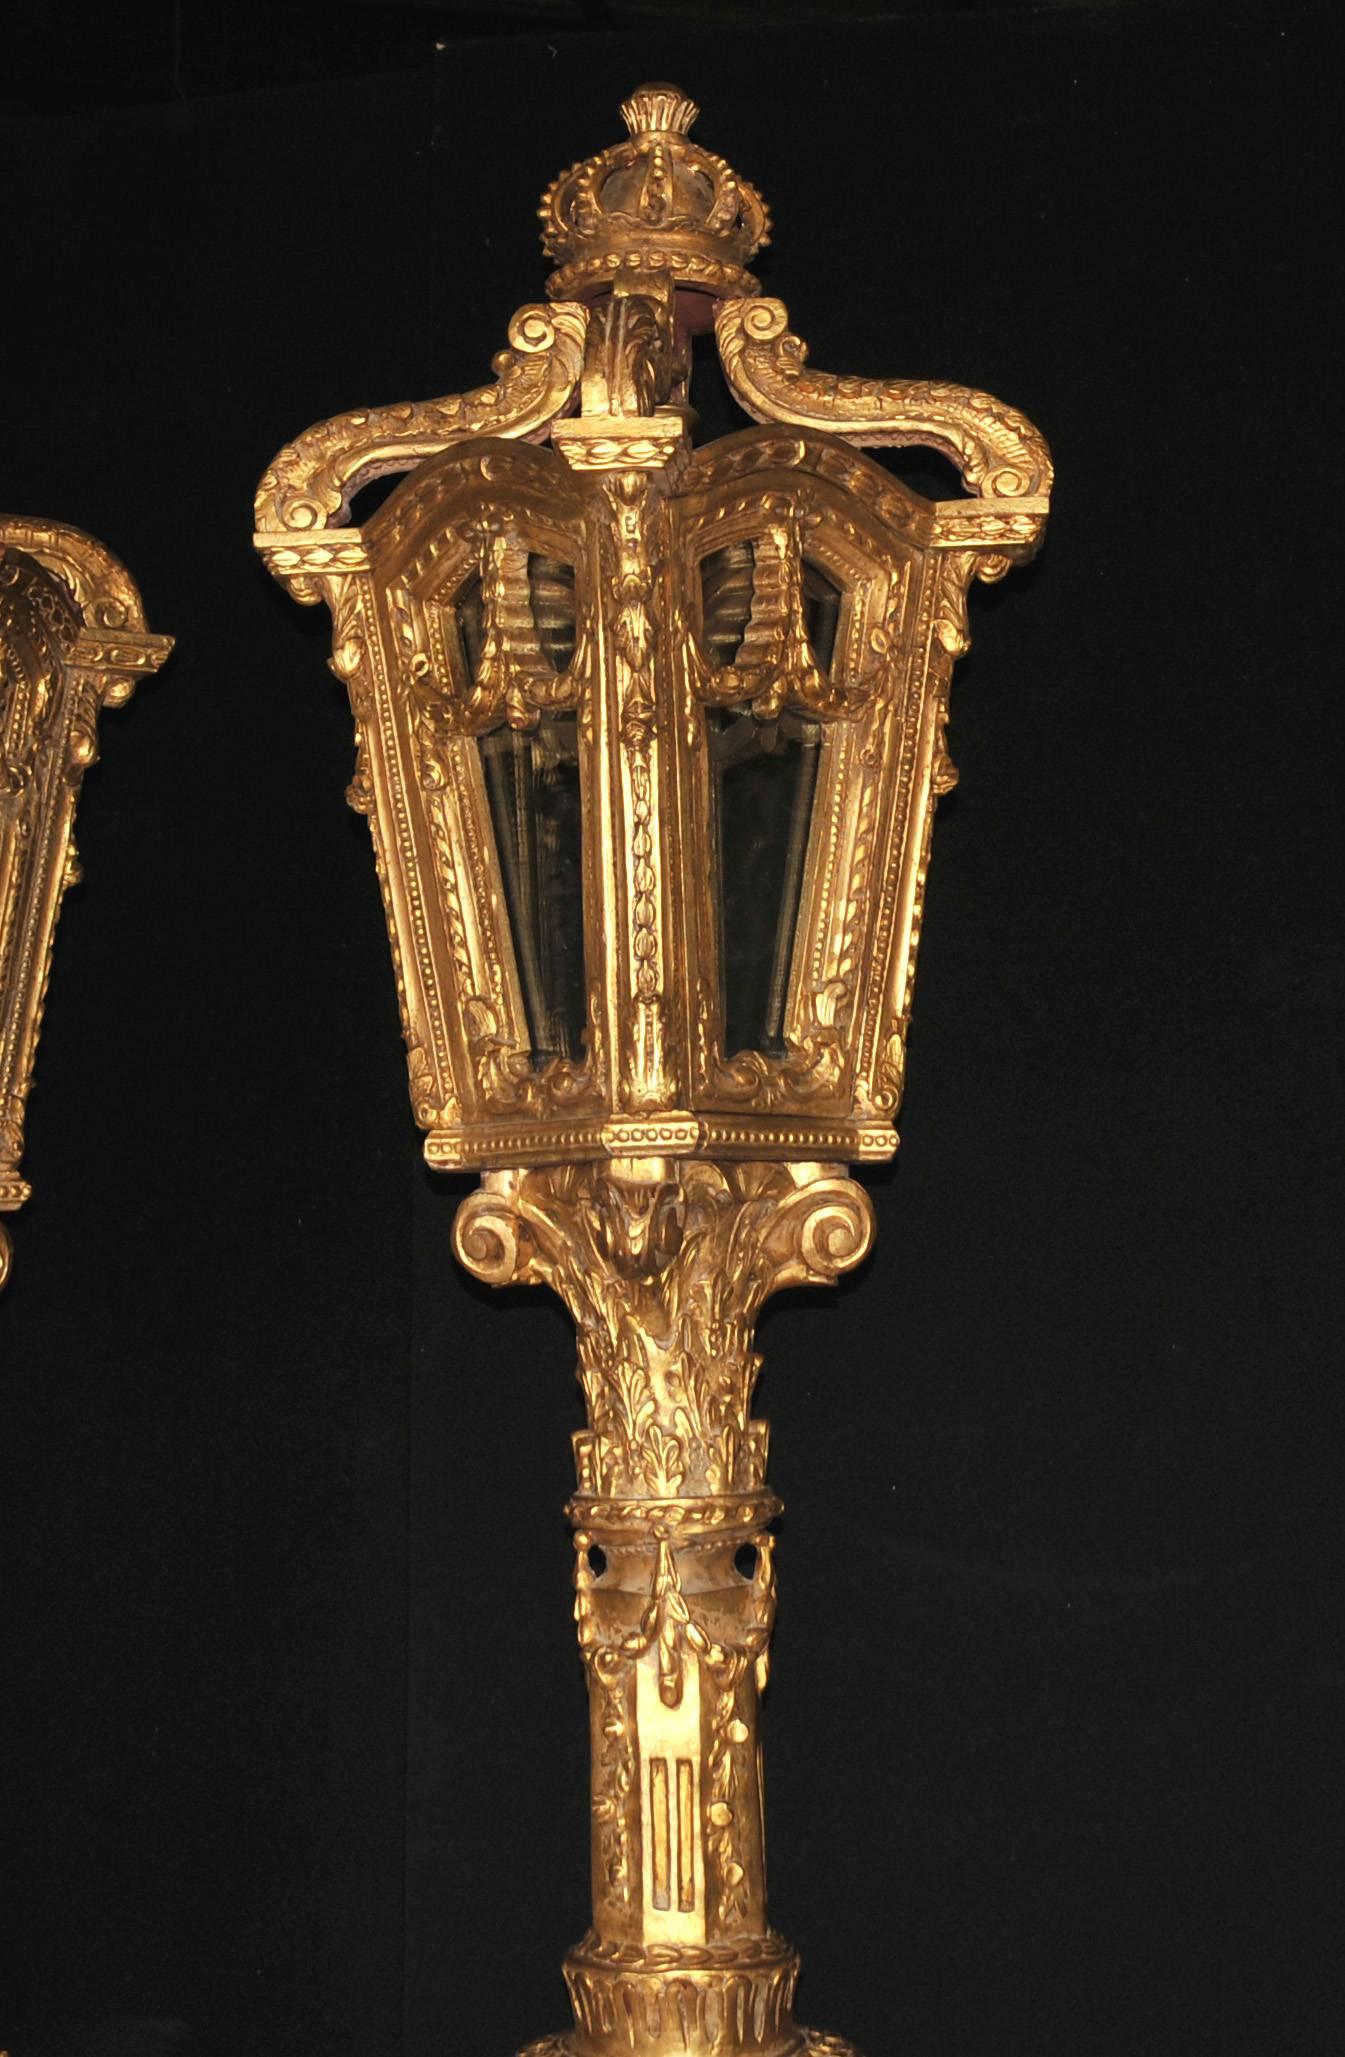 Pair large pair of Italian giltwood tall lamps or lanterns

Almost like a very elegant pair of street lamps, these stands in at over 8 feet tall (261 cm).
They are hand carved and the details are exquisite, very intricate and florid.
Surmounted